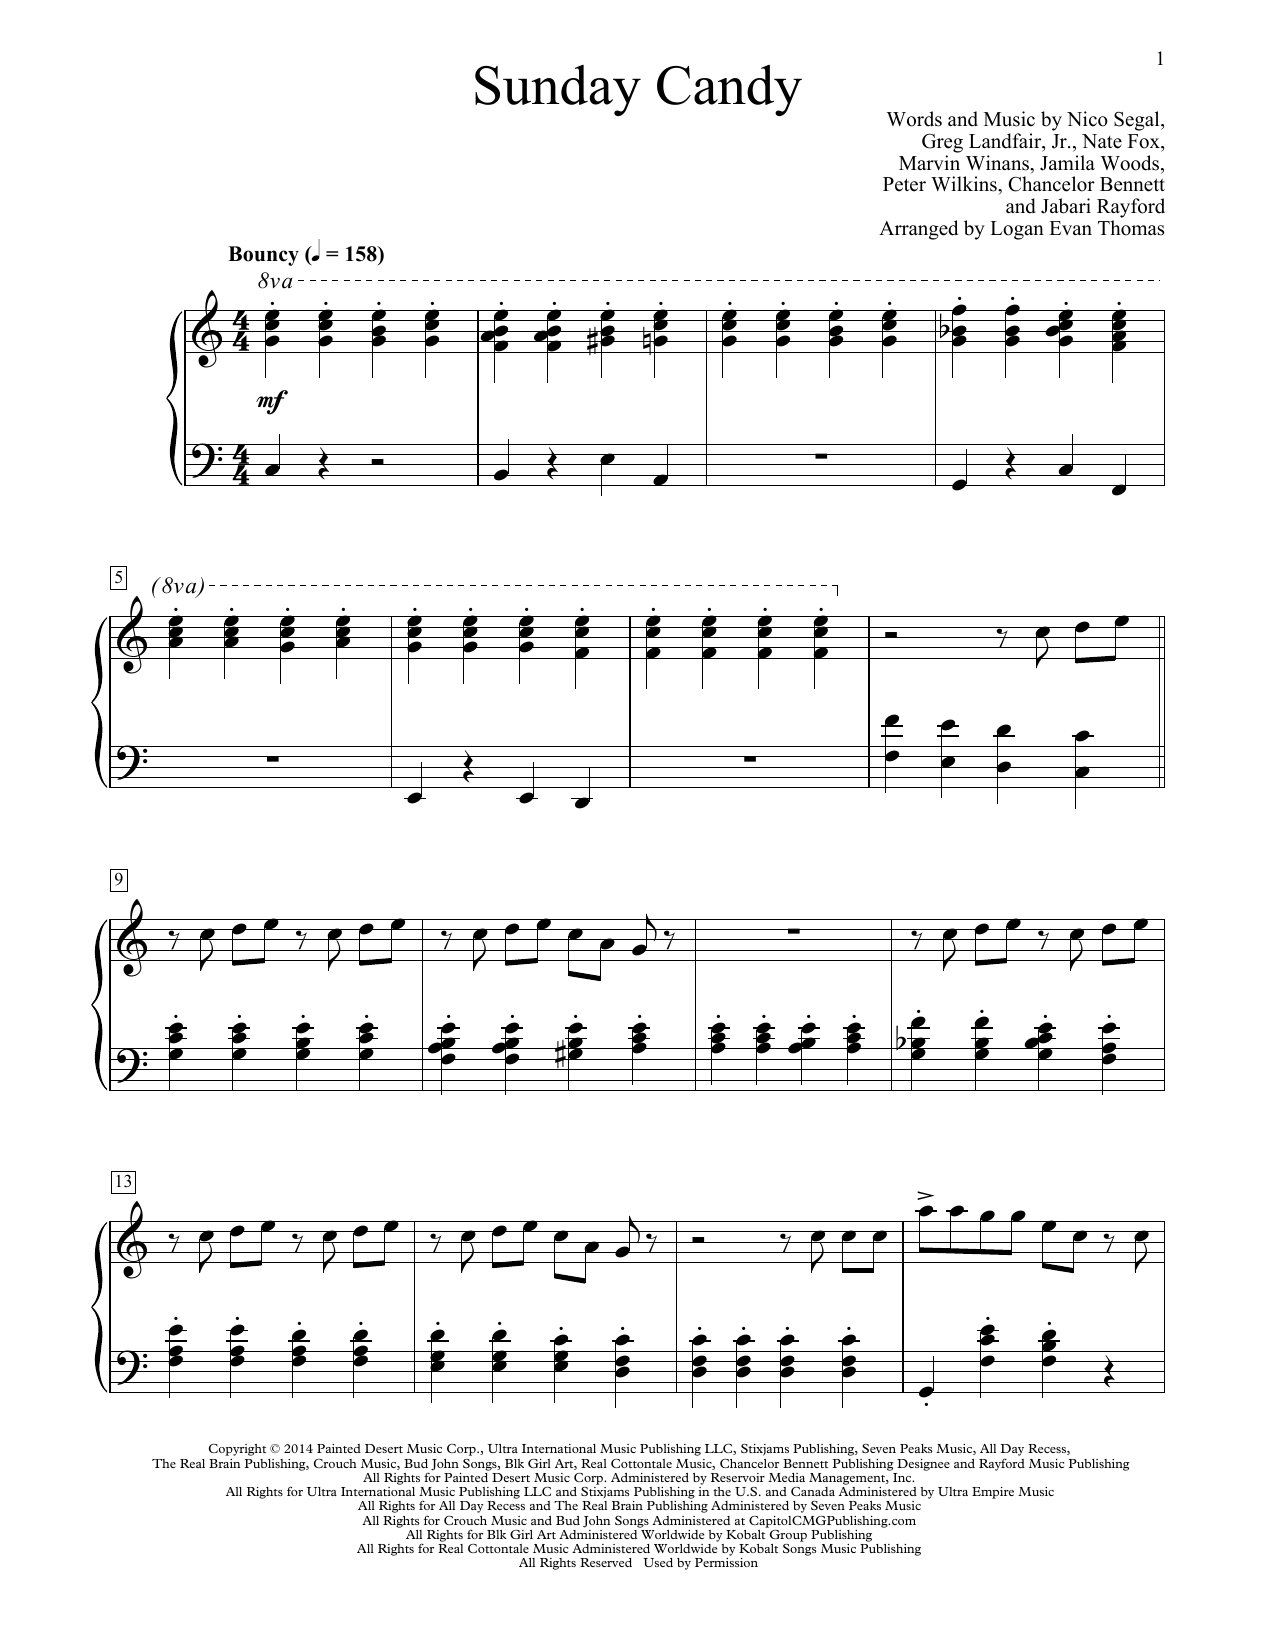 Download Chance The Rapper Sunday Candy (arr. Logan Evan Thomas) Sheet Music